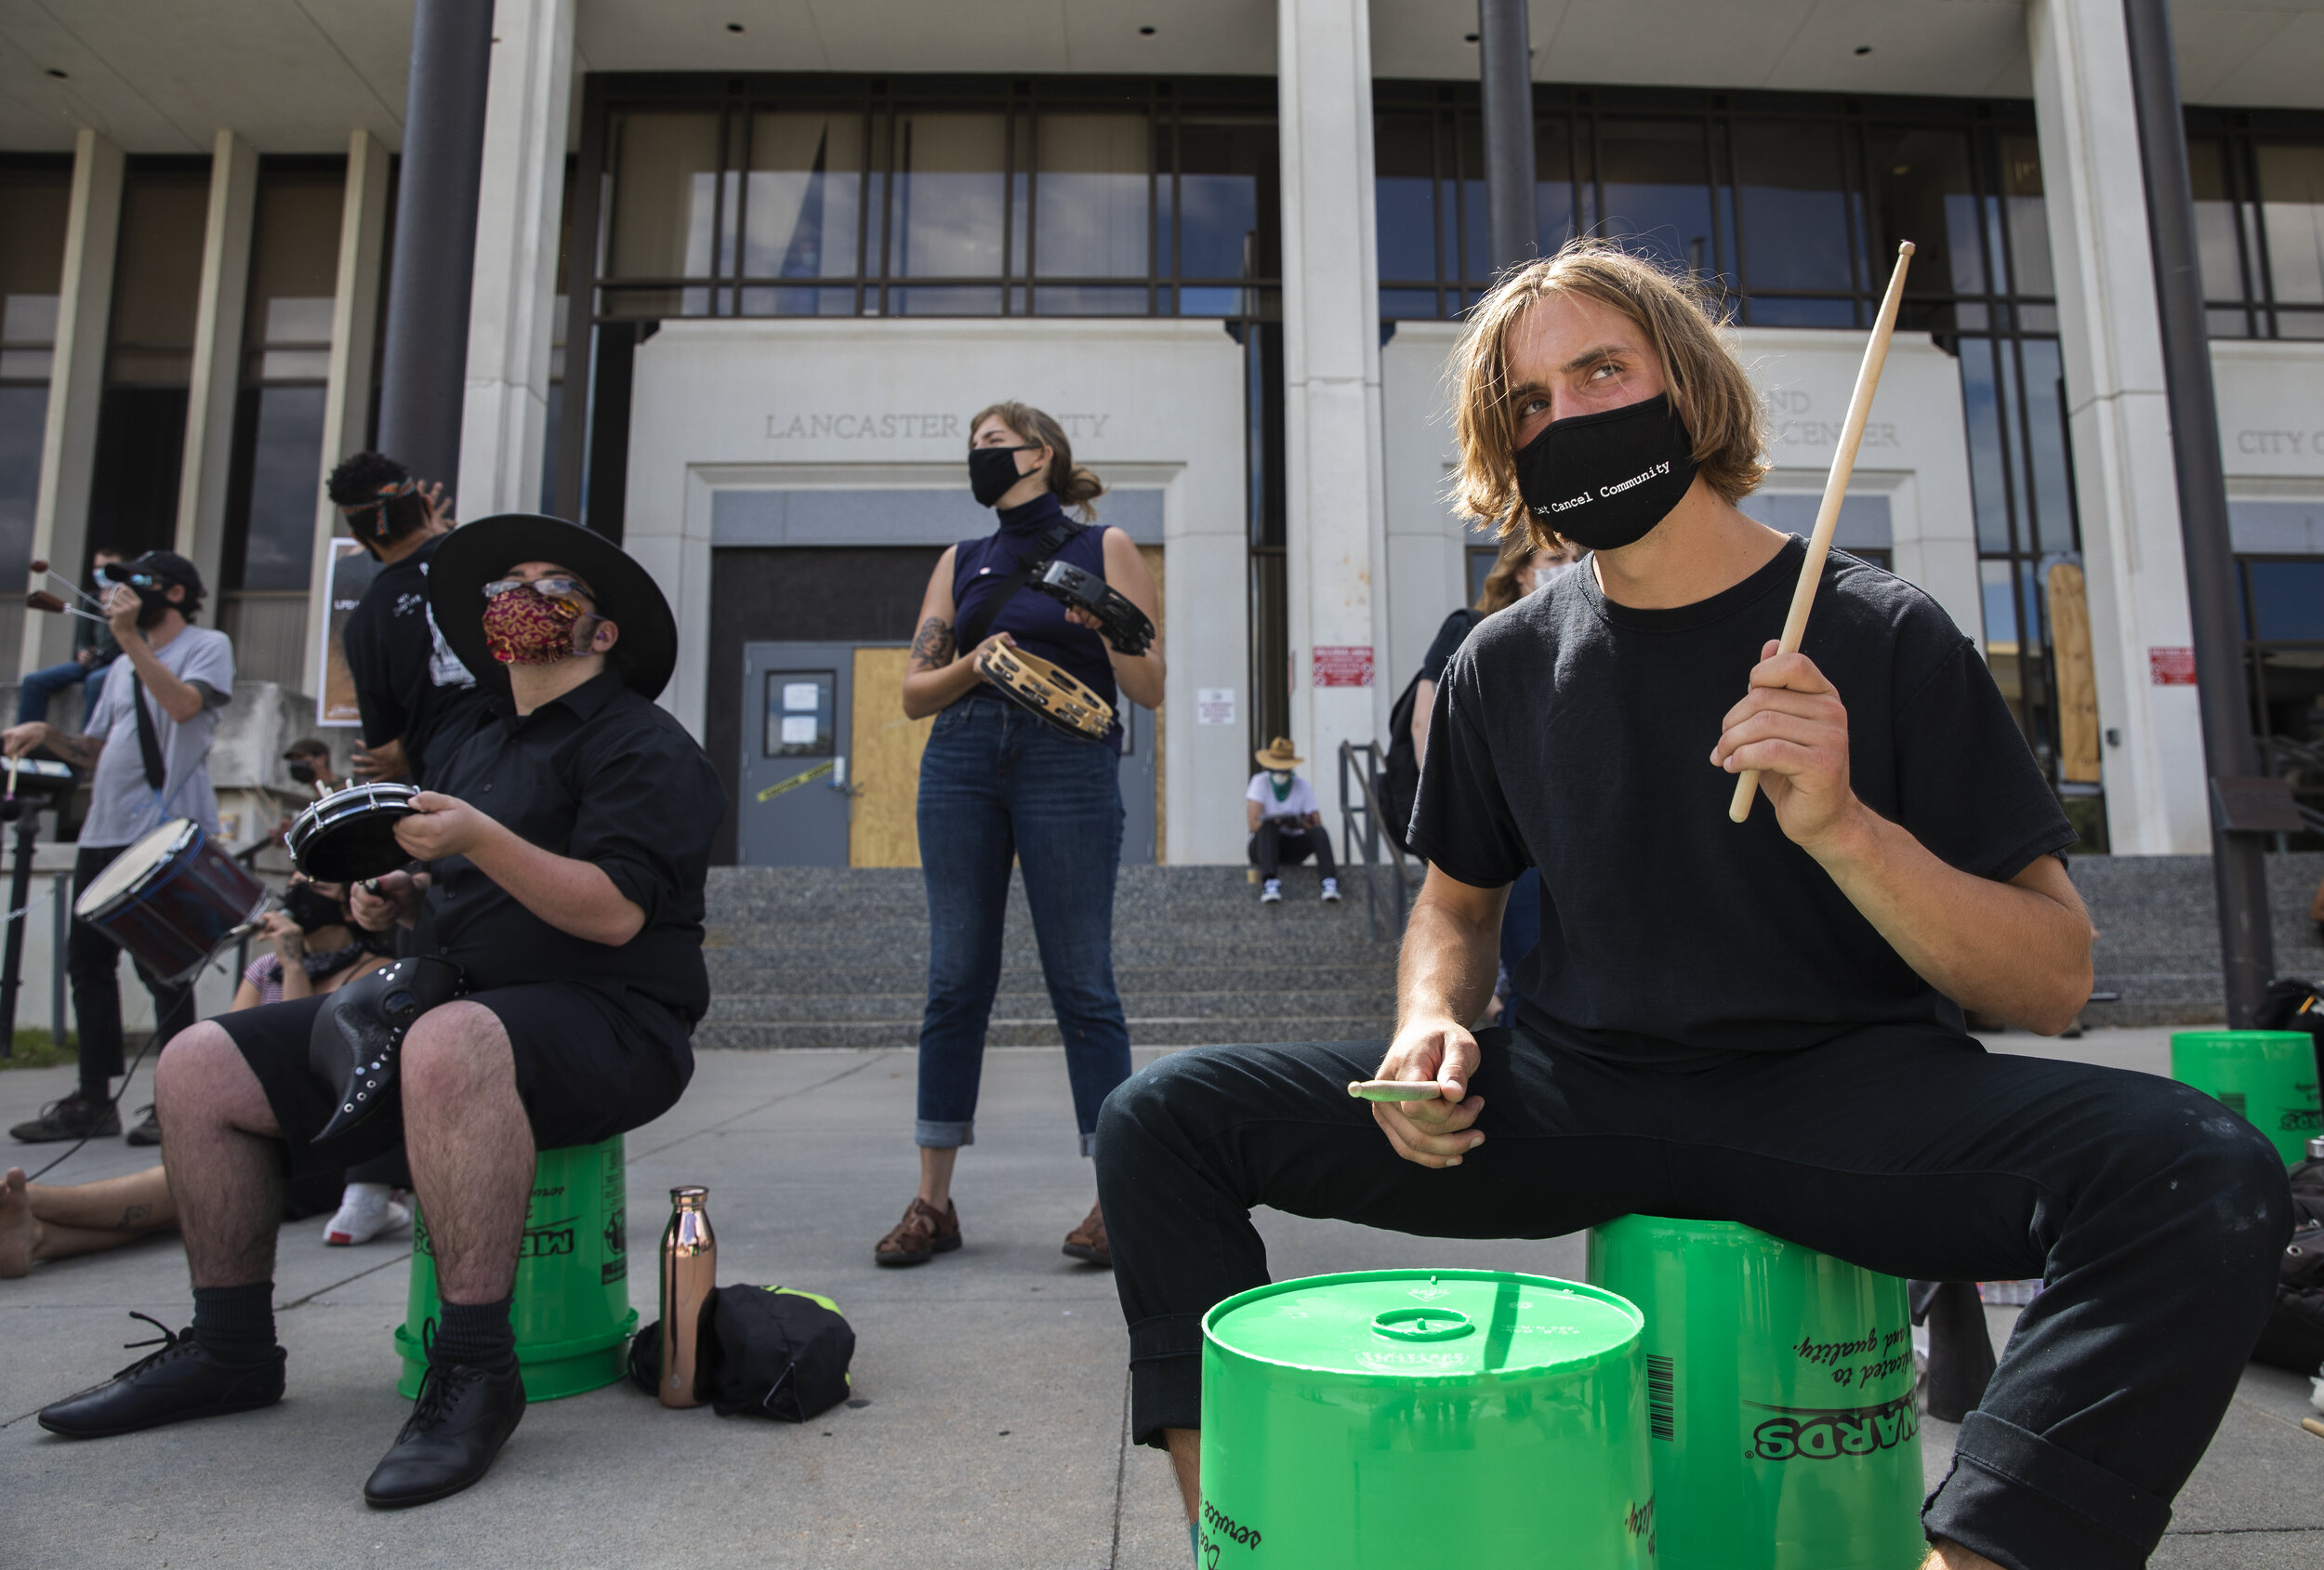  Caleb Petersen (right) uses buckets to drum alongside other protesters during a protest outside of County-City Building while the city council meets inside on Monday, August 03, 2020, in Lincoln, Nebraska. KENNETH FERRIERA, Journal Star. 